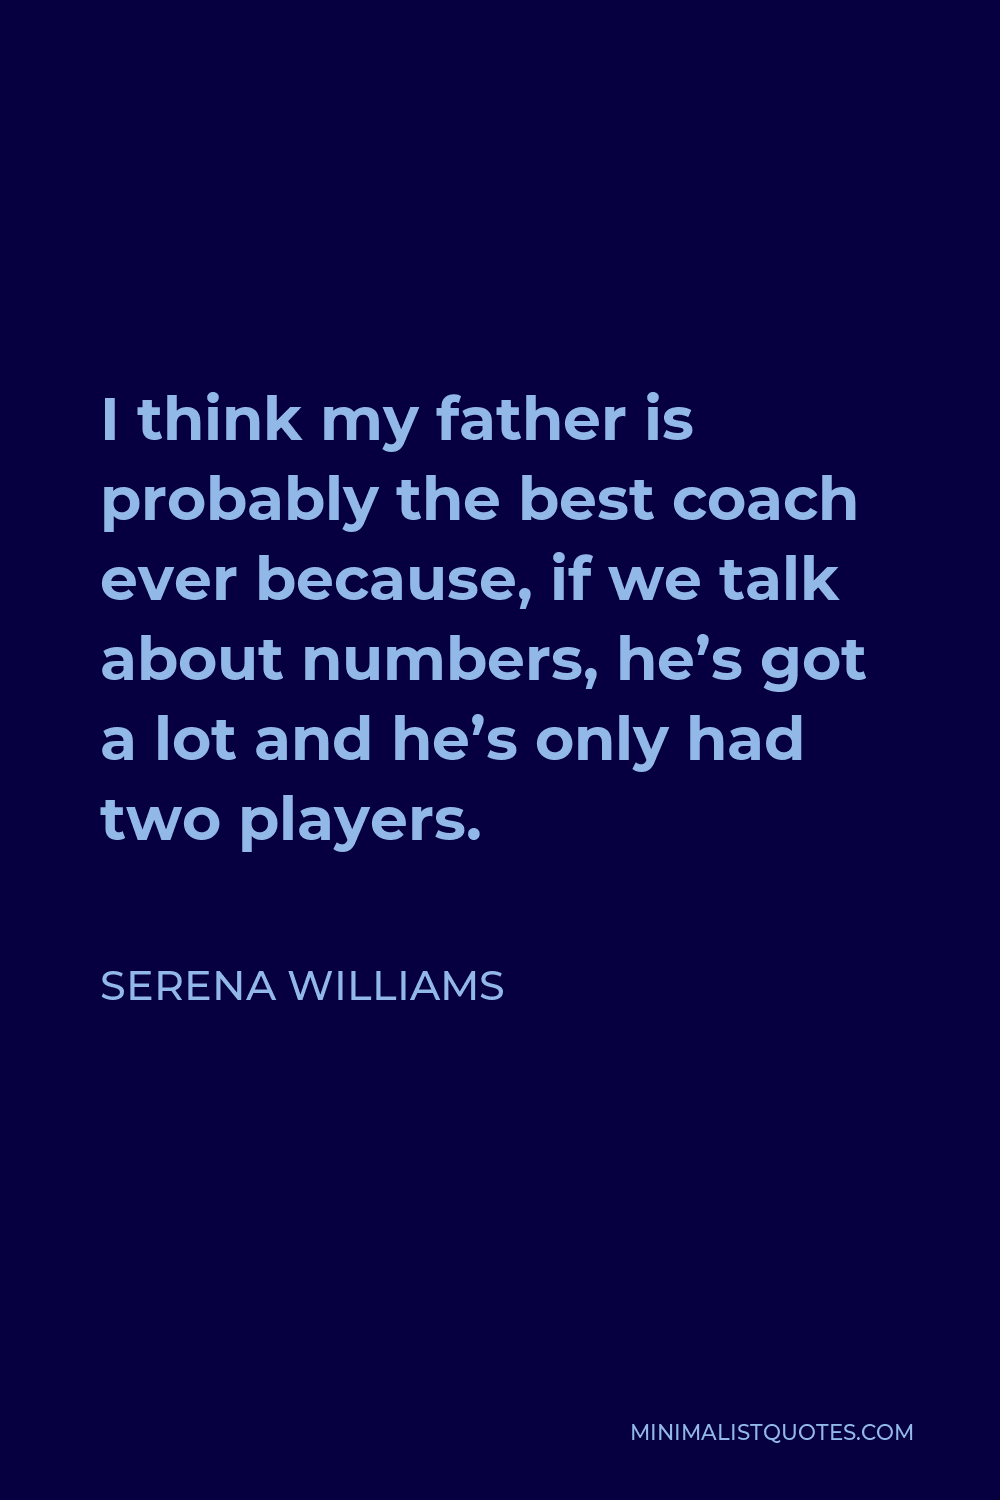 Serena Williams Quote - I think my father is probably the best coach ever because, if we talk about numbers, he’s got a lot and he’s only had two players.